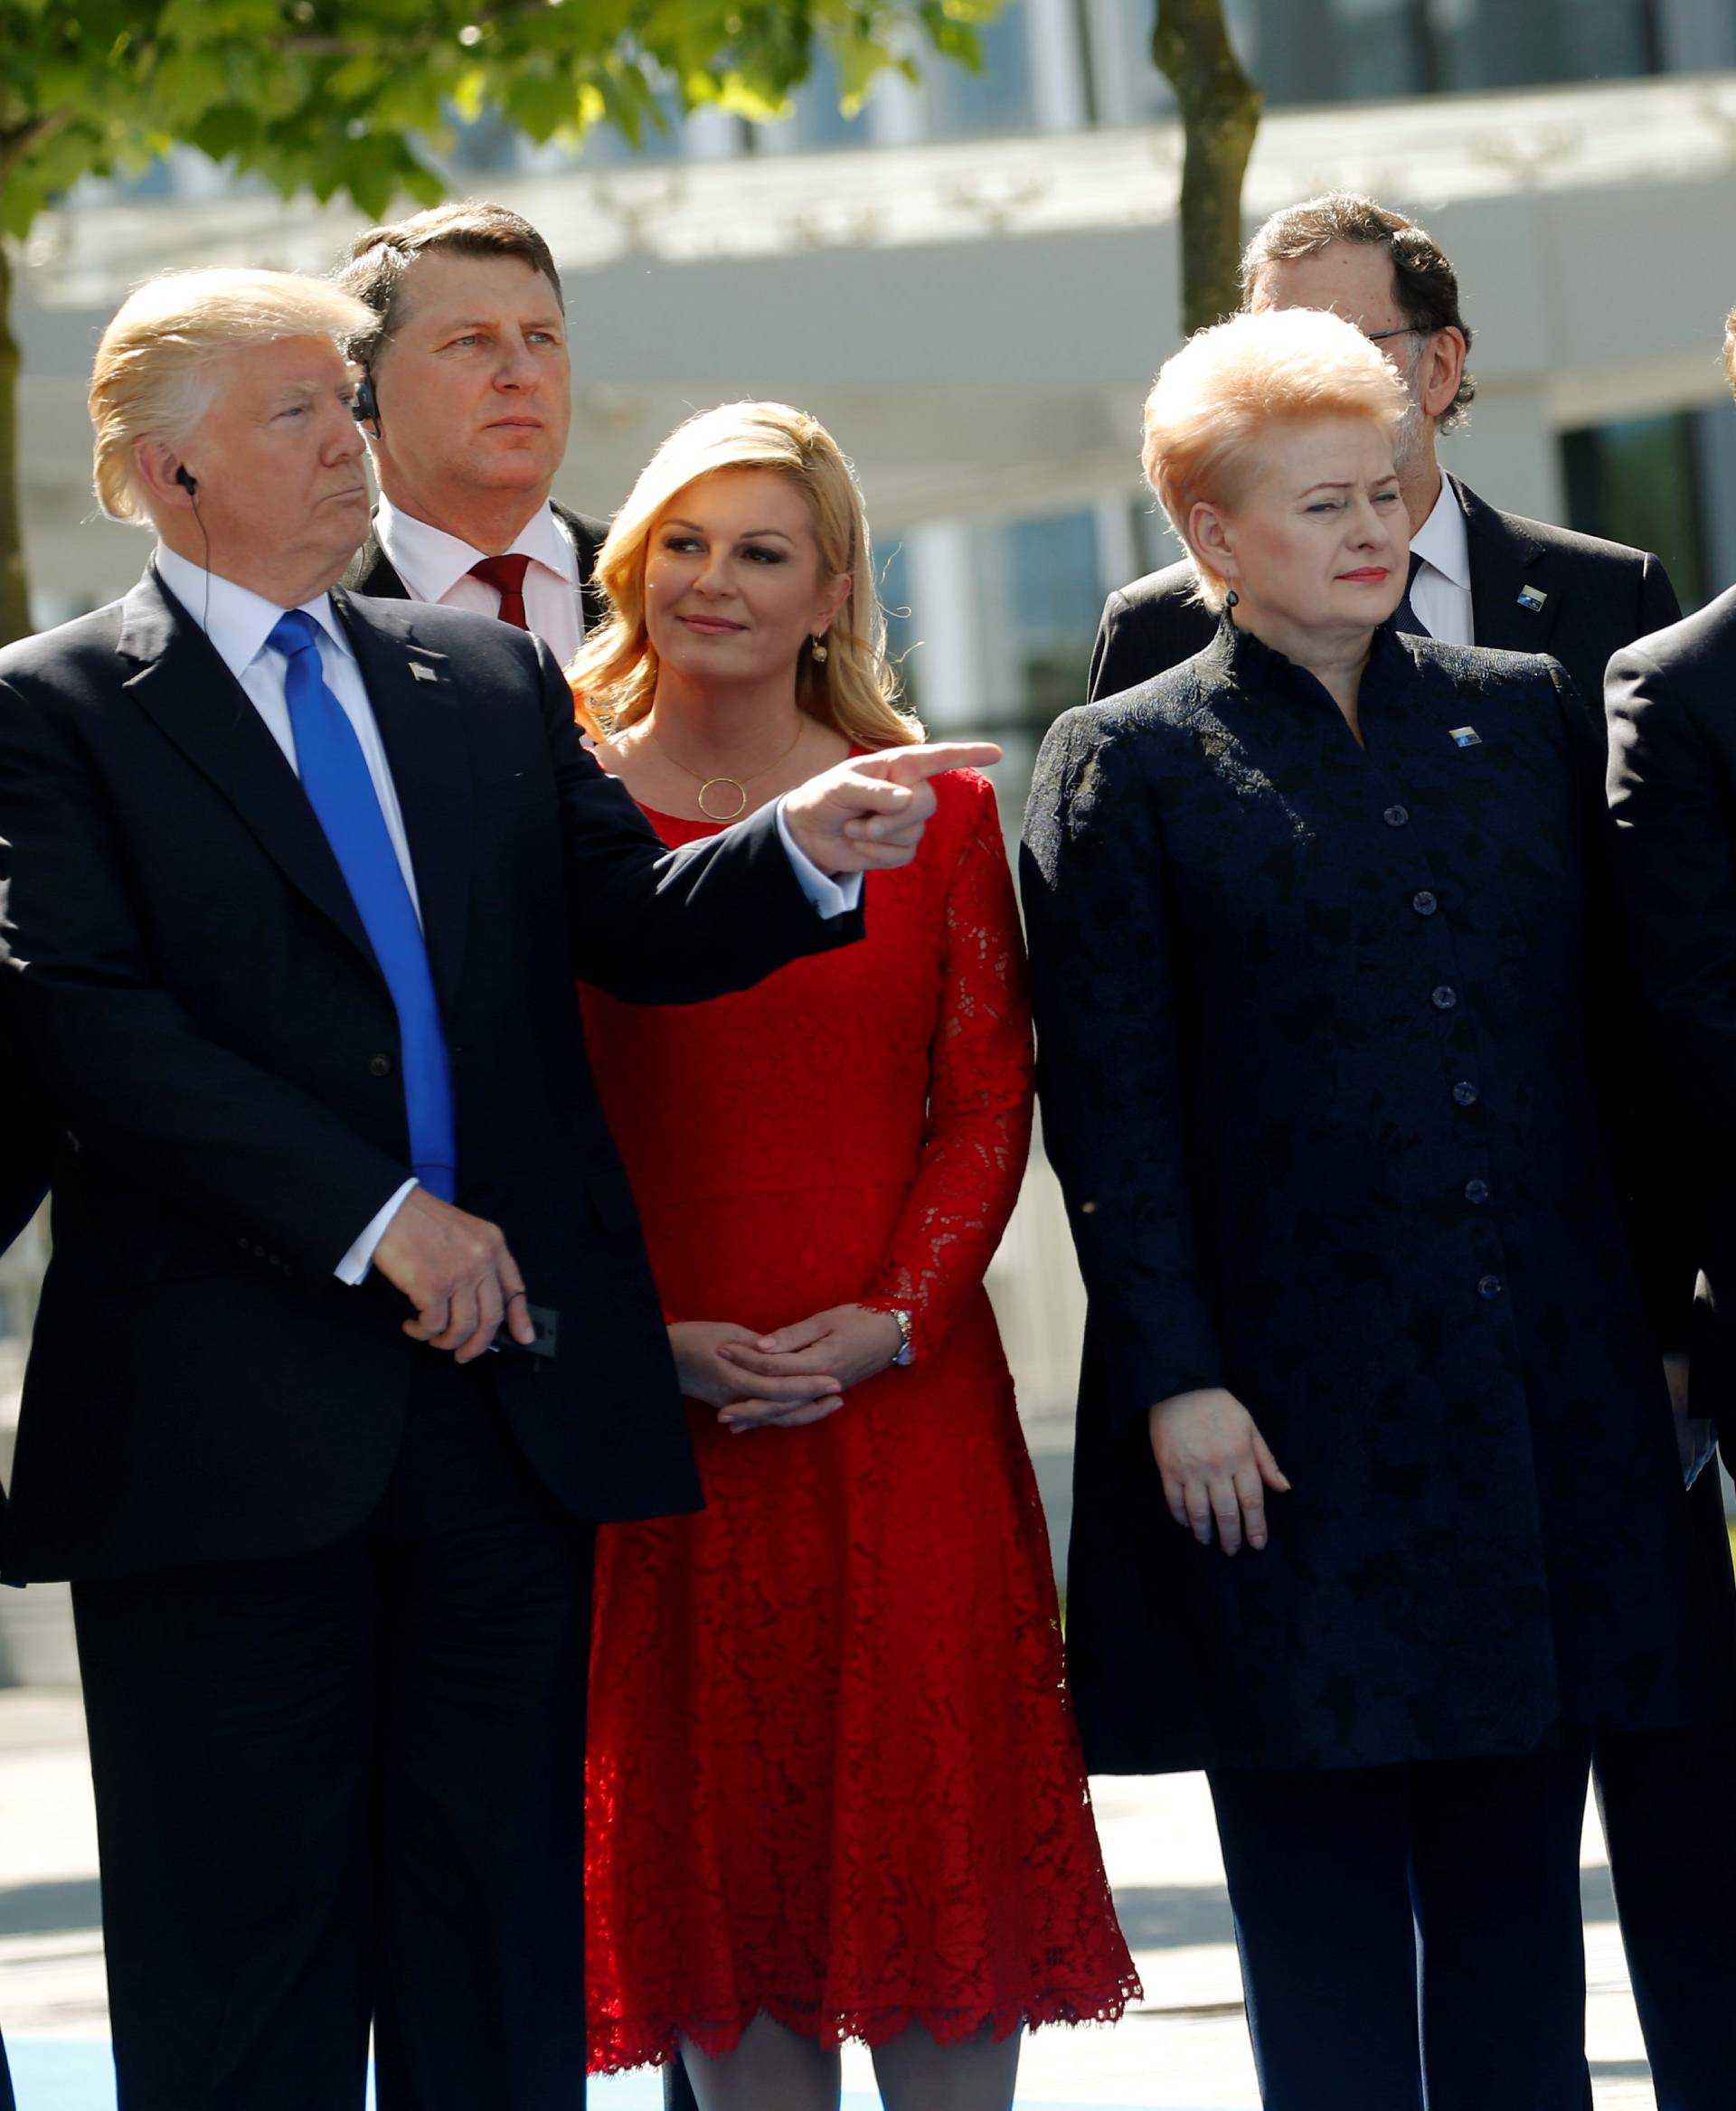 U.S. President Trump gestures next to Croatia's President Grabar-Kitarovic, Germany's Chancellor Merkel, France's President Macron, Belgium's PM Michel and Luxembourg's PM Bettel during a NATO summit at their new headquarters in Brussels